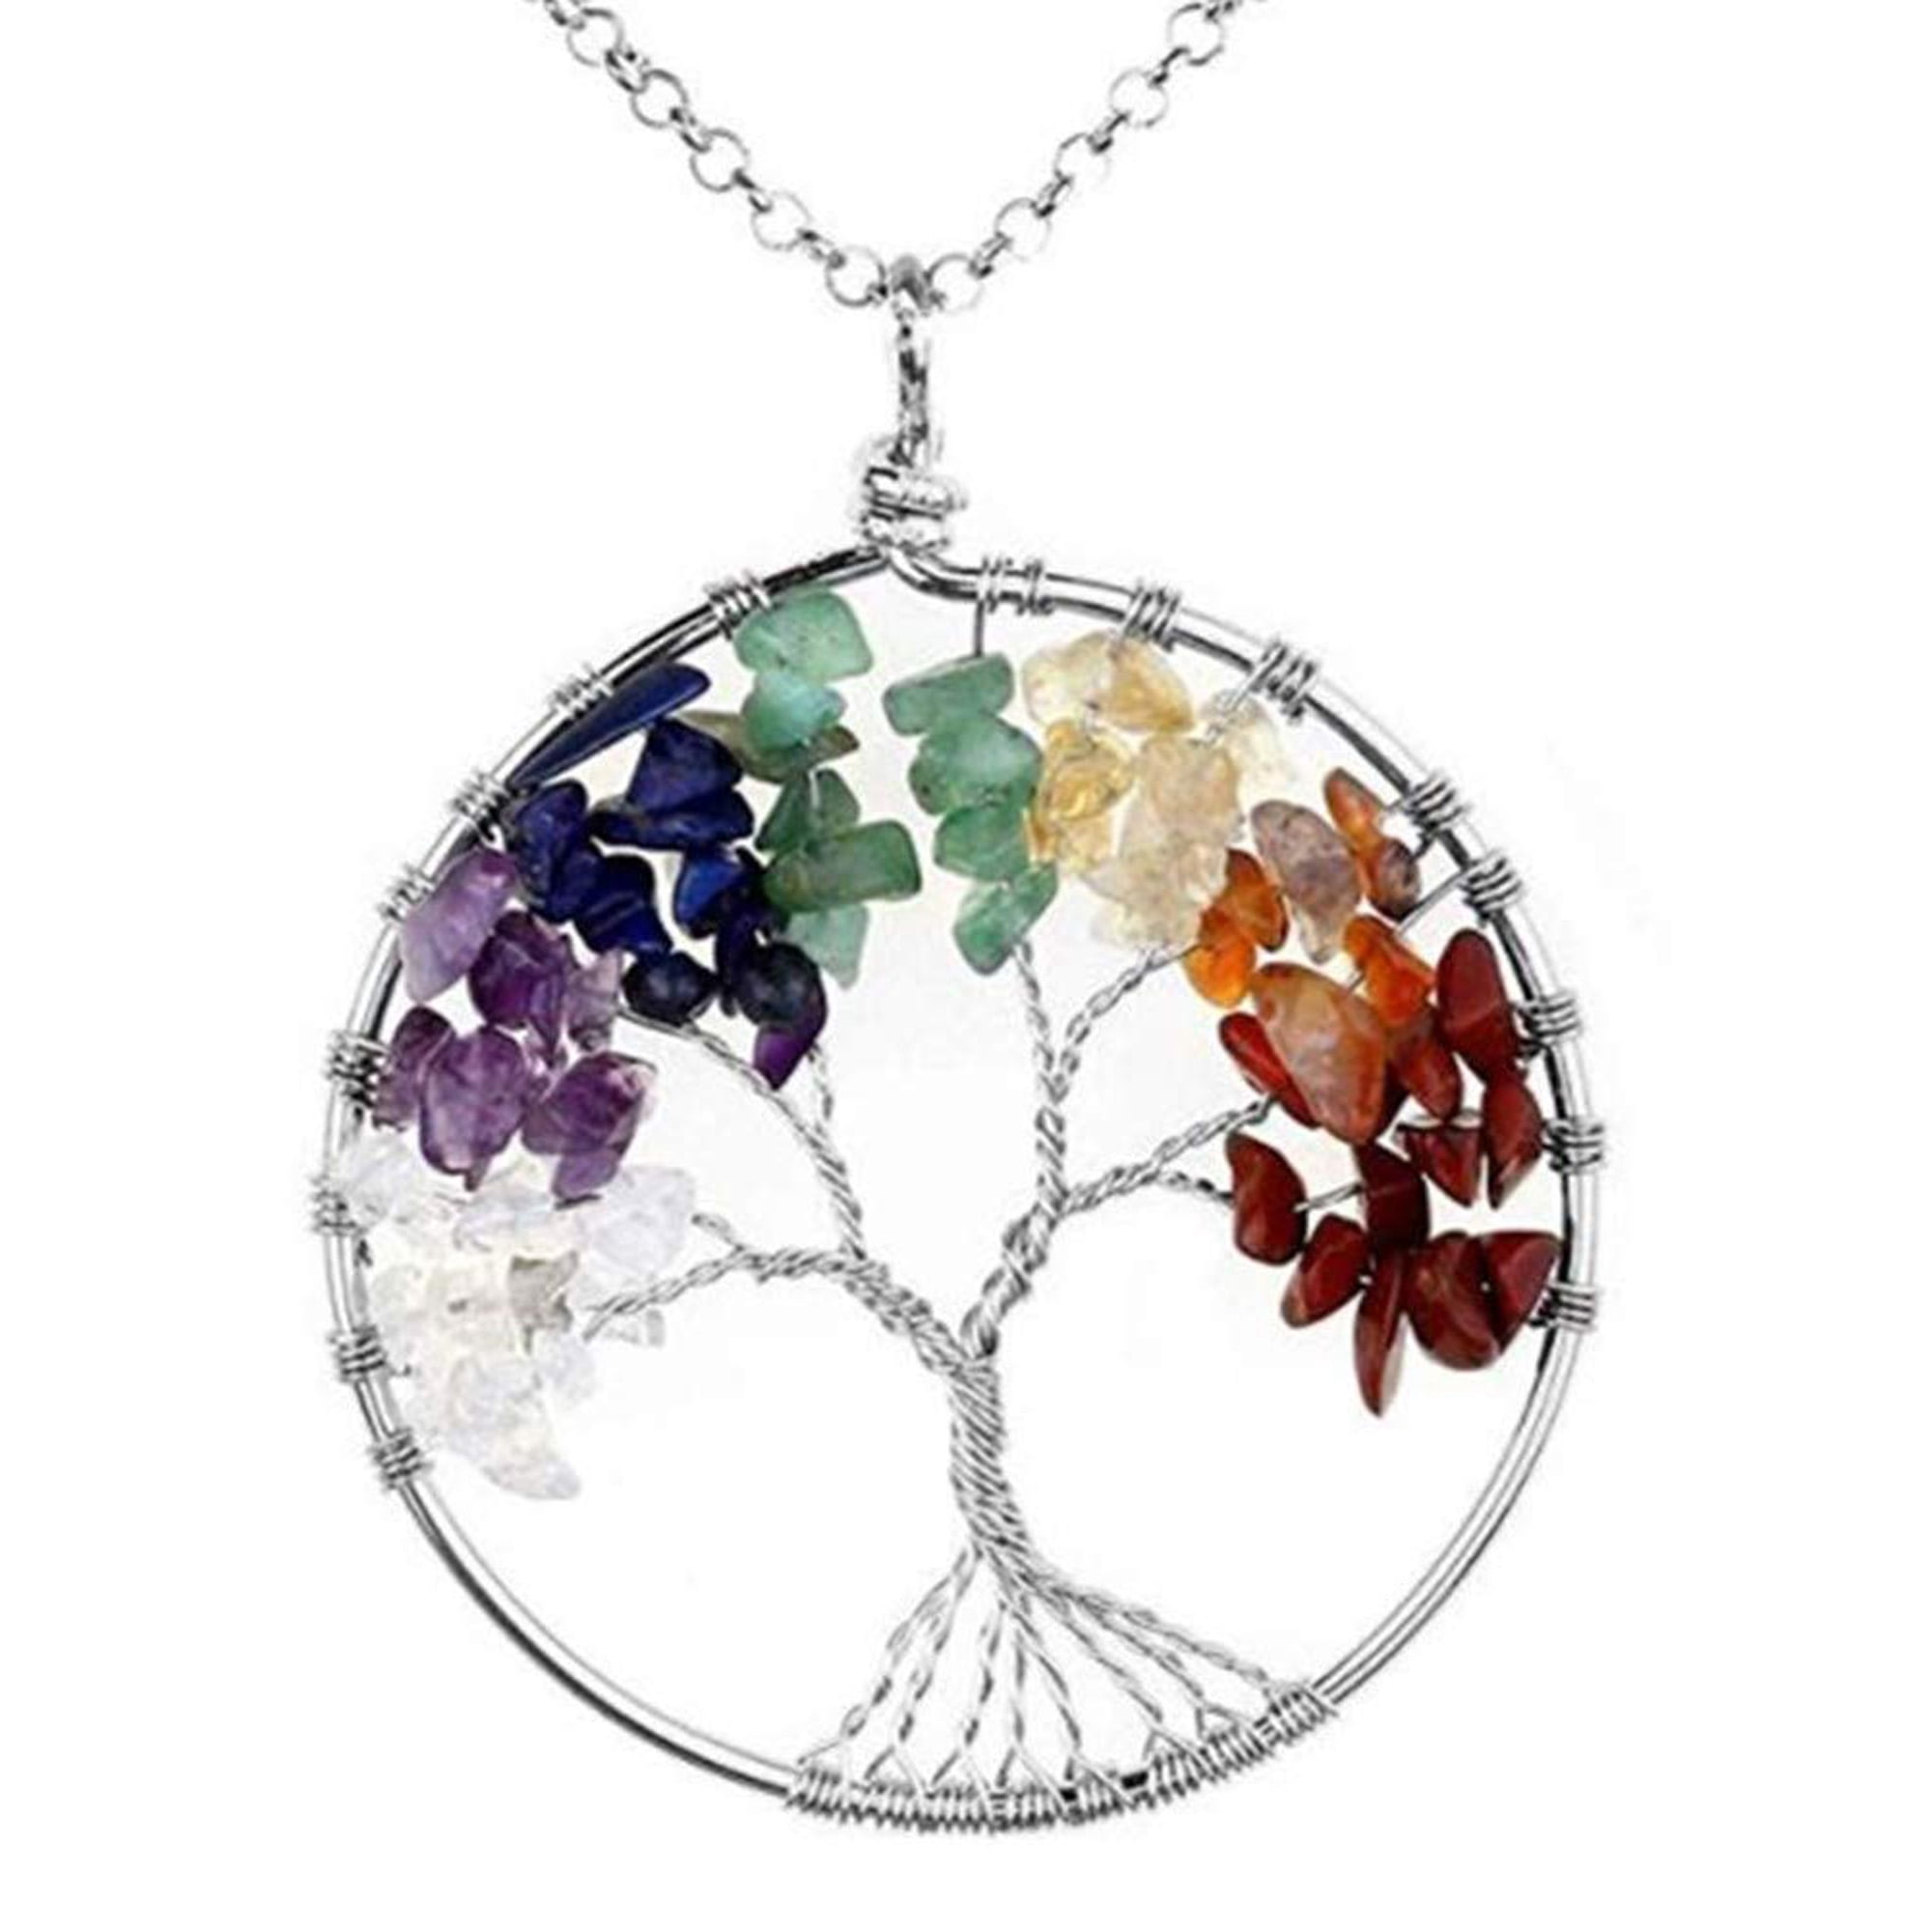 7 Chakra Healing Stones Tree Of Life Pendant Necklace Reiki Charged Gift crystal 